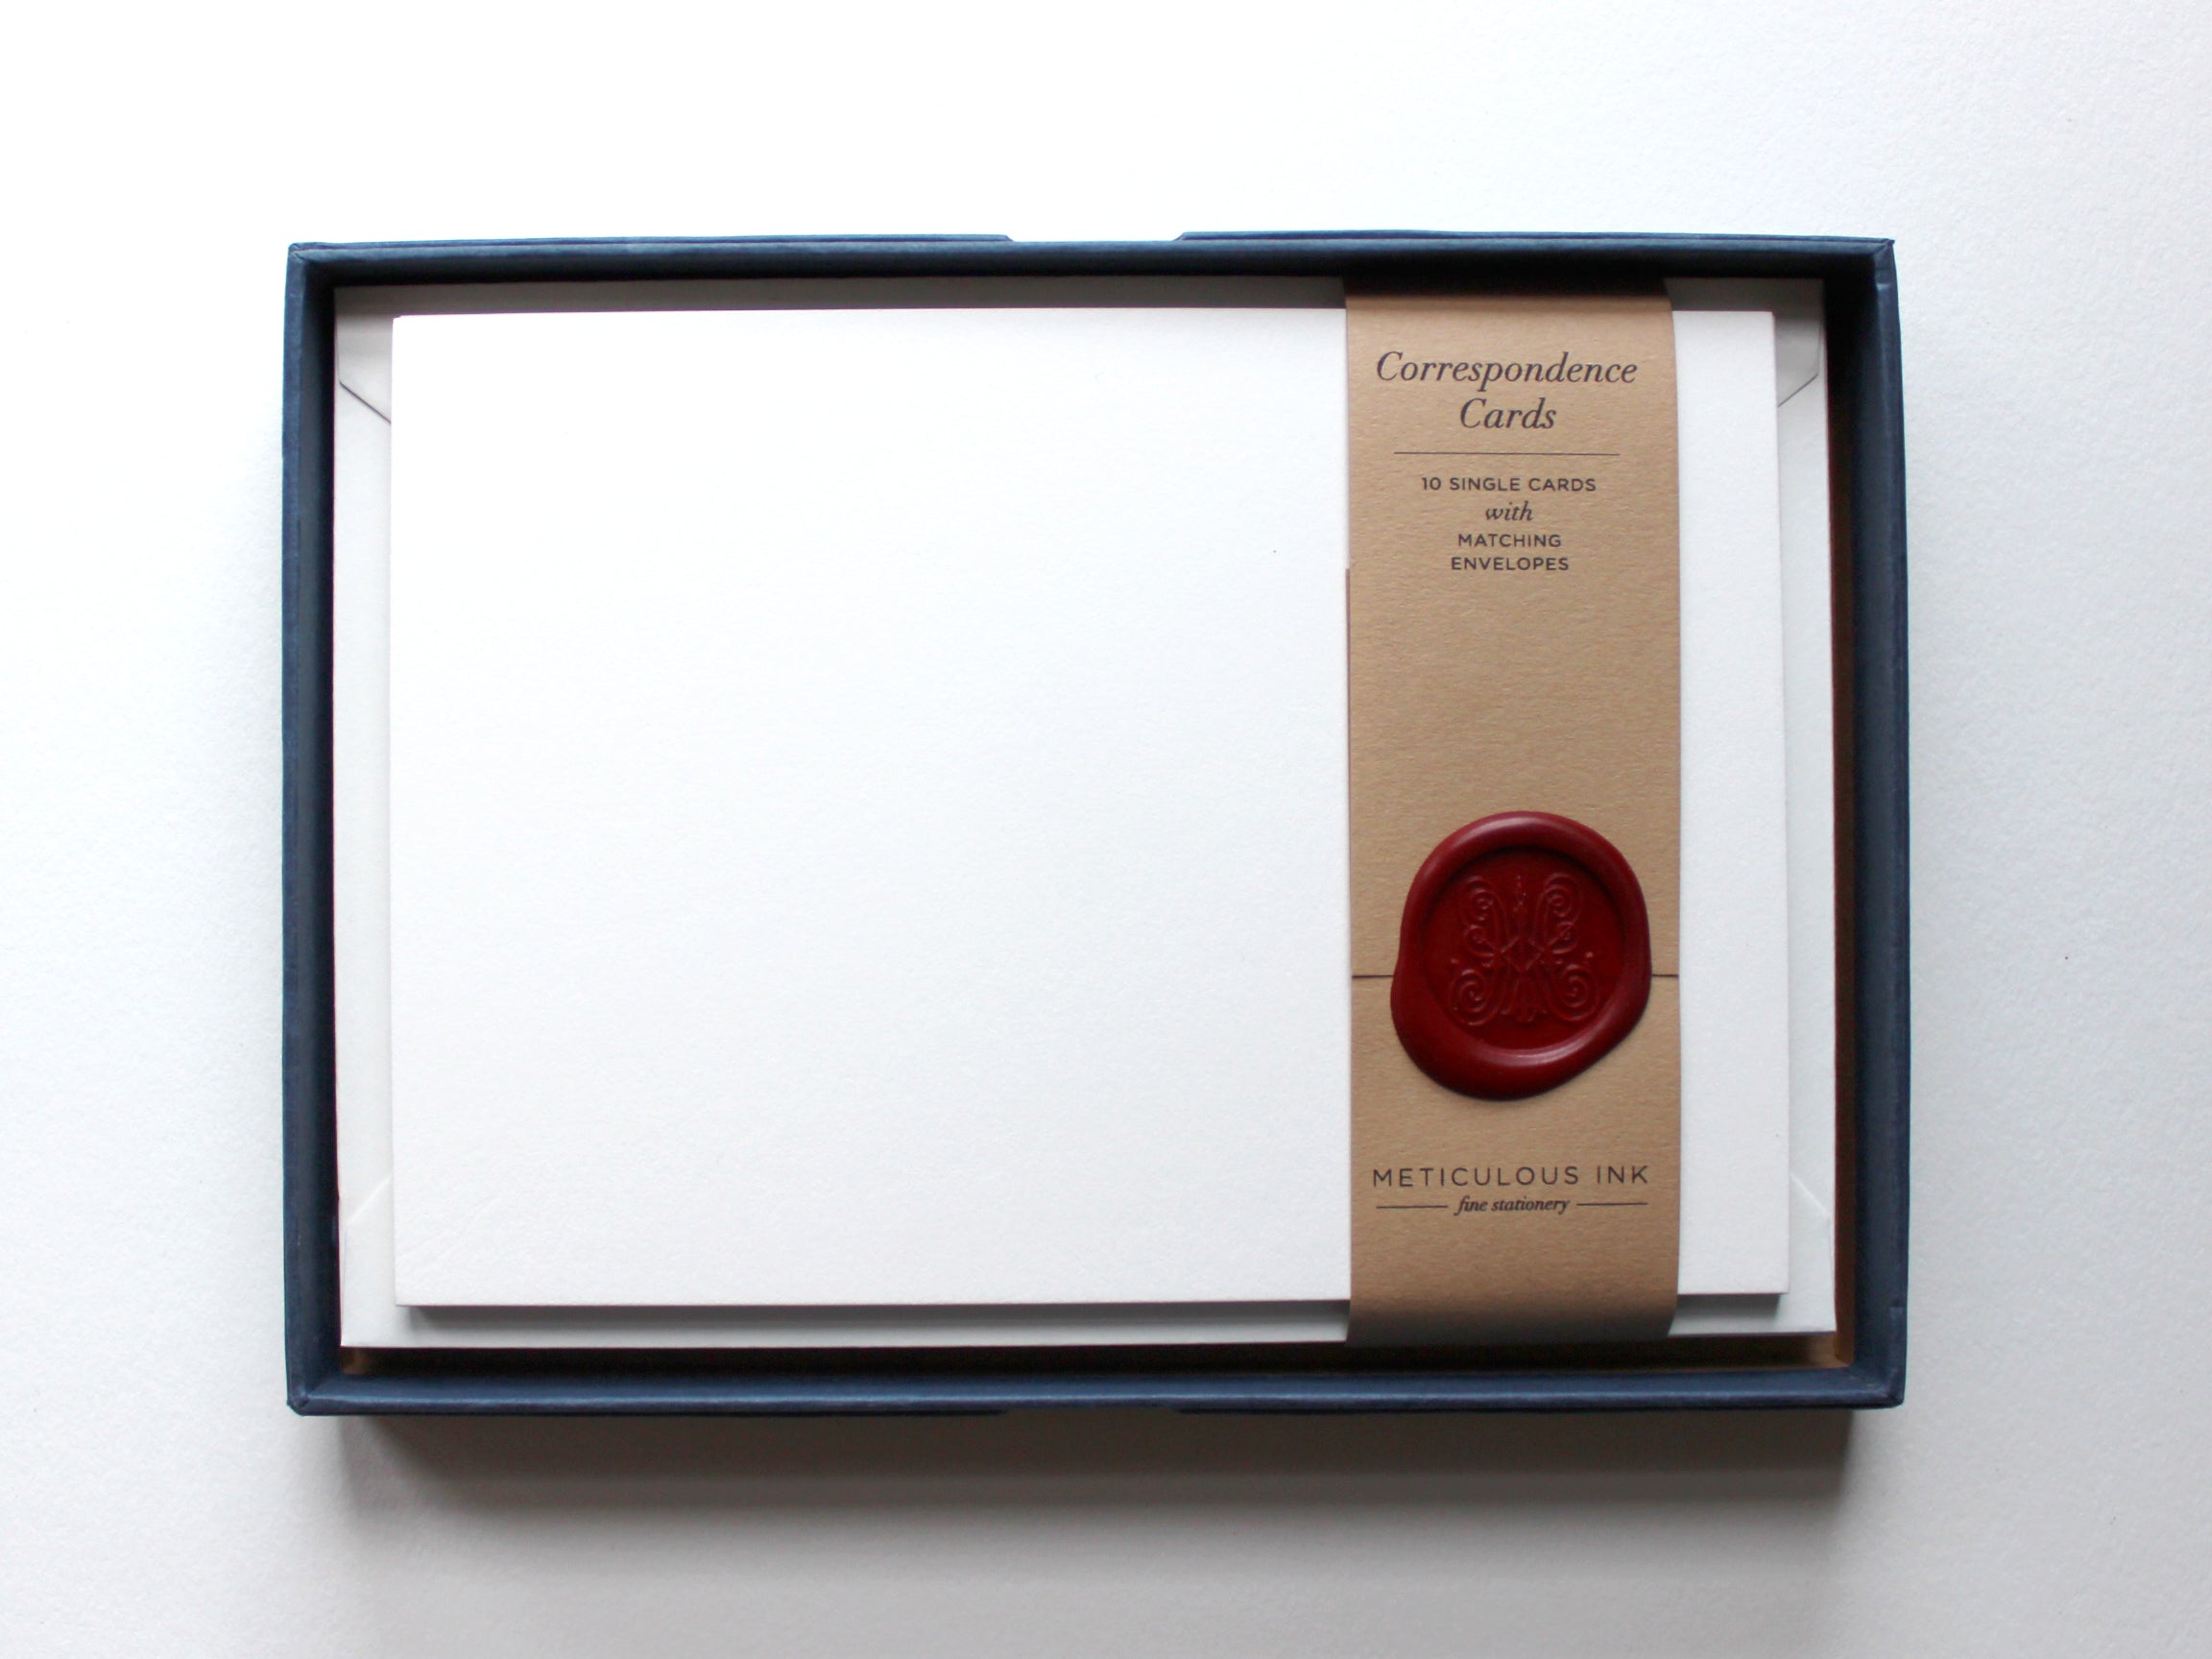 Plain Correspondence Cards in display box with wax seal